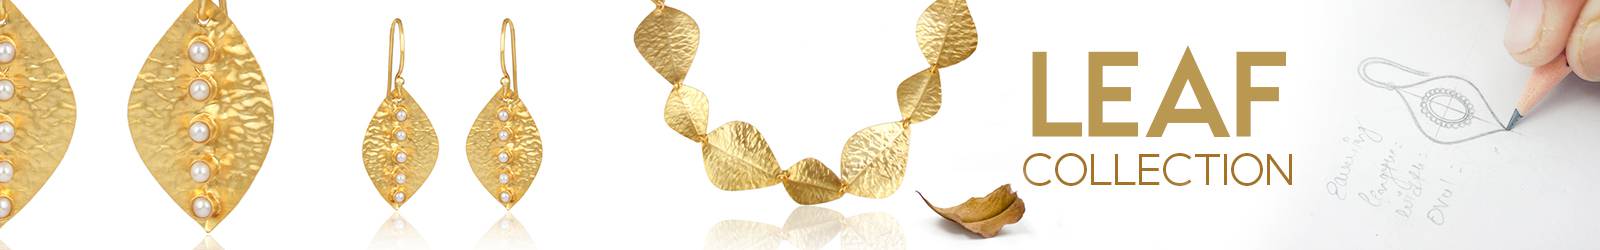 Online Wholesale Leaf Silver Jewelry Manufacturer in Jaipur